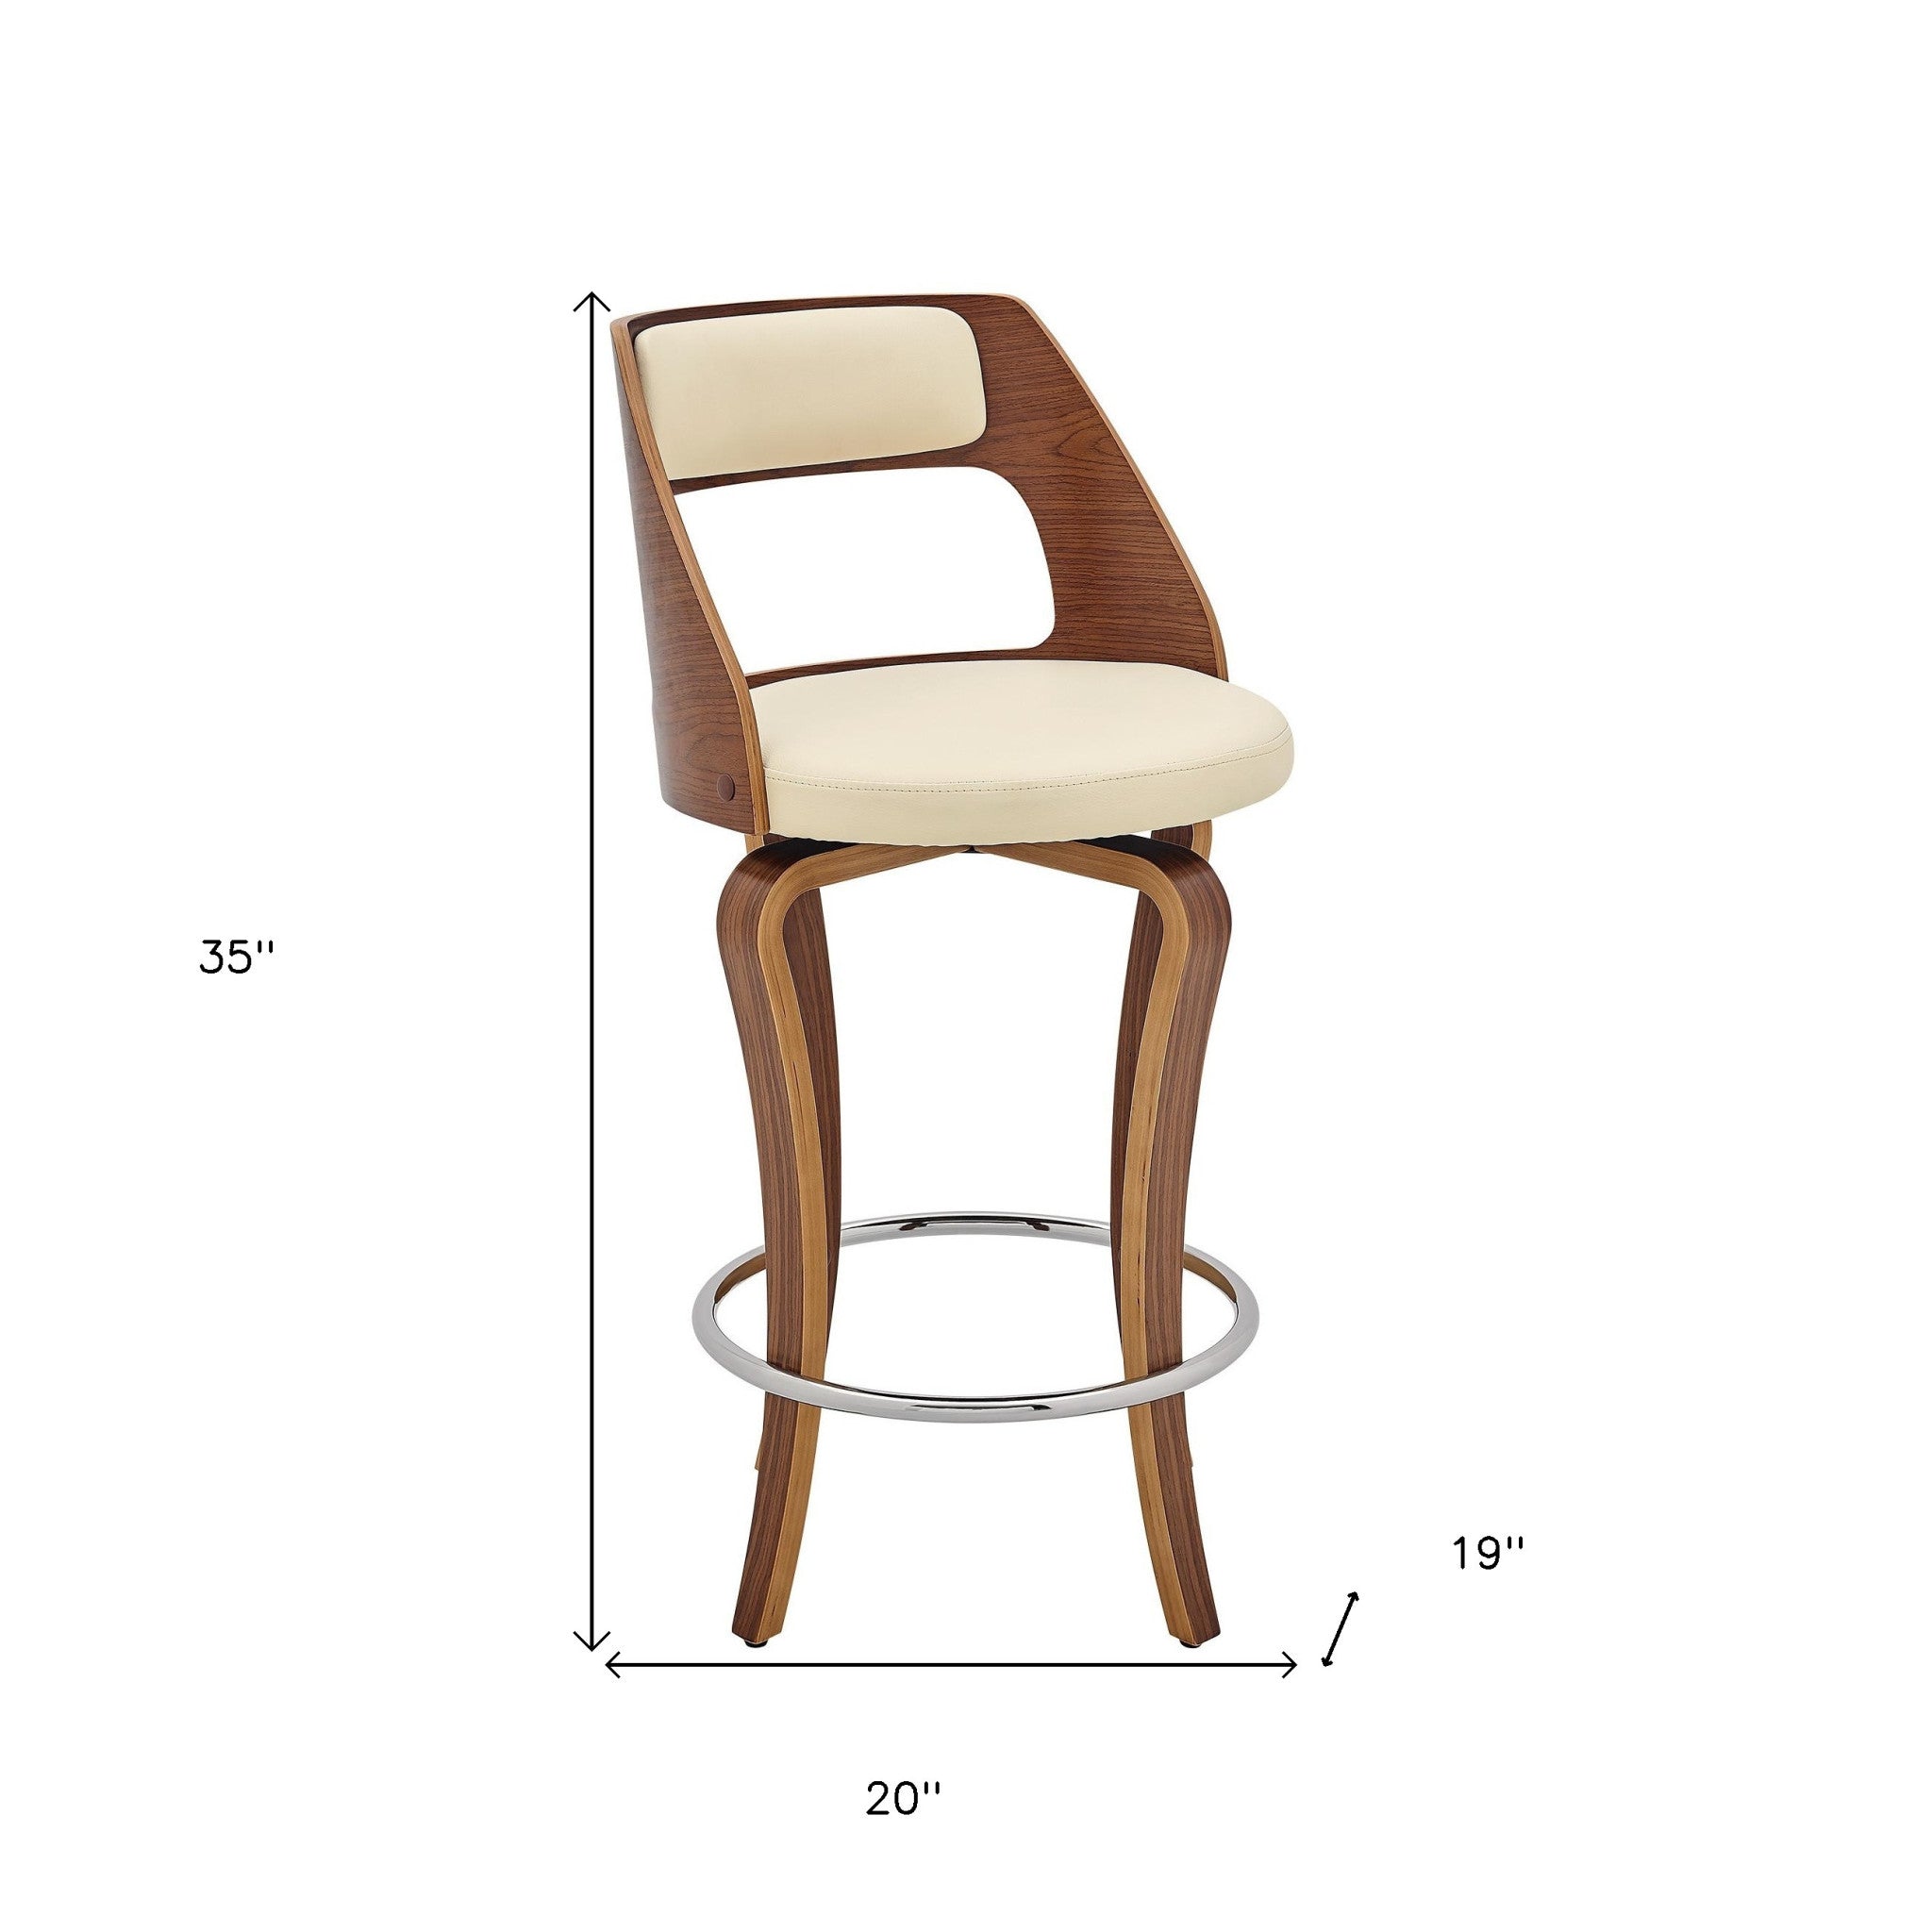 25" Cream And Brown Faux Leather Swivel Counter Height Bar Chair